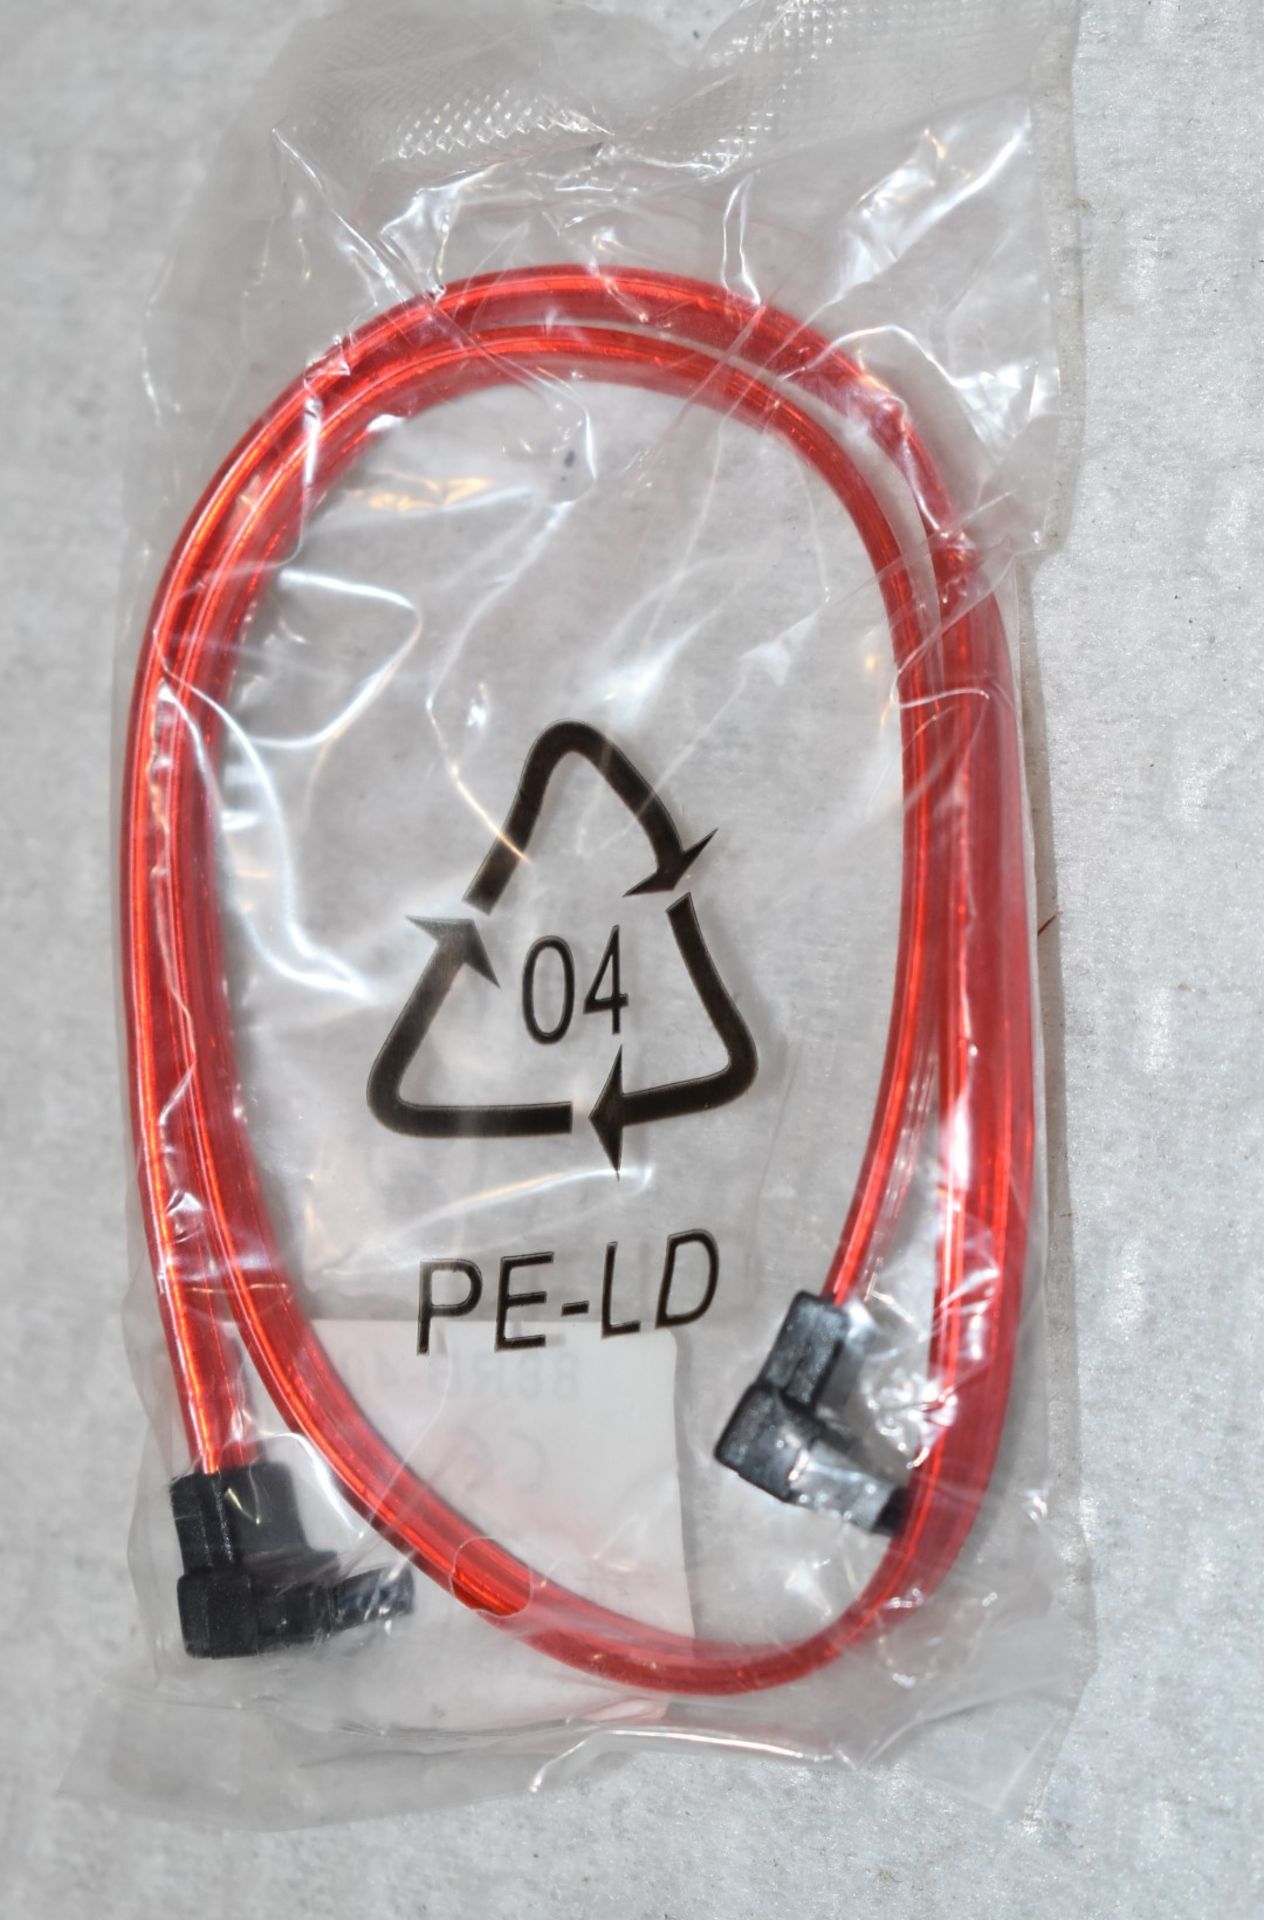 30 x Red SATA Hard Drive Cables - New in Packets - Image 2 of 4